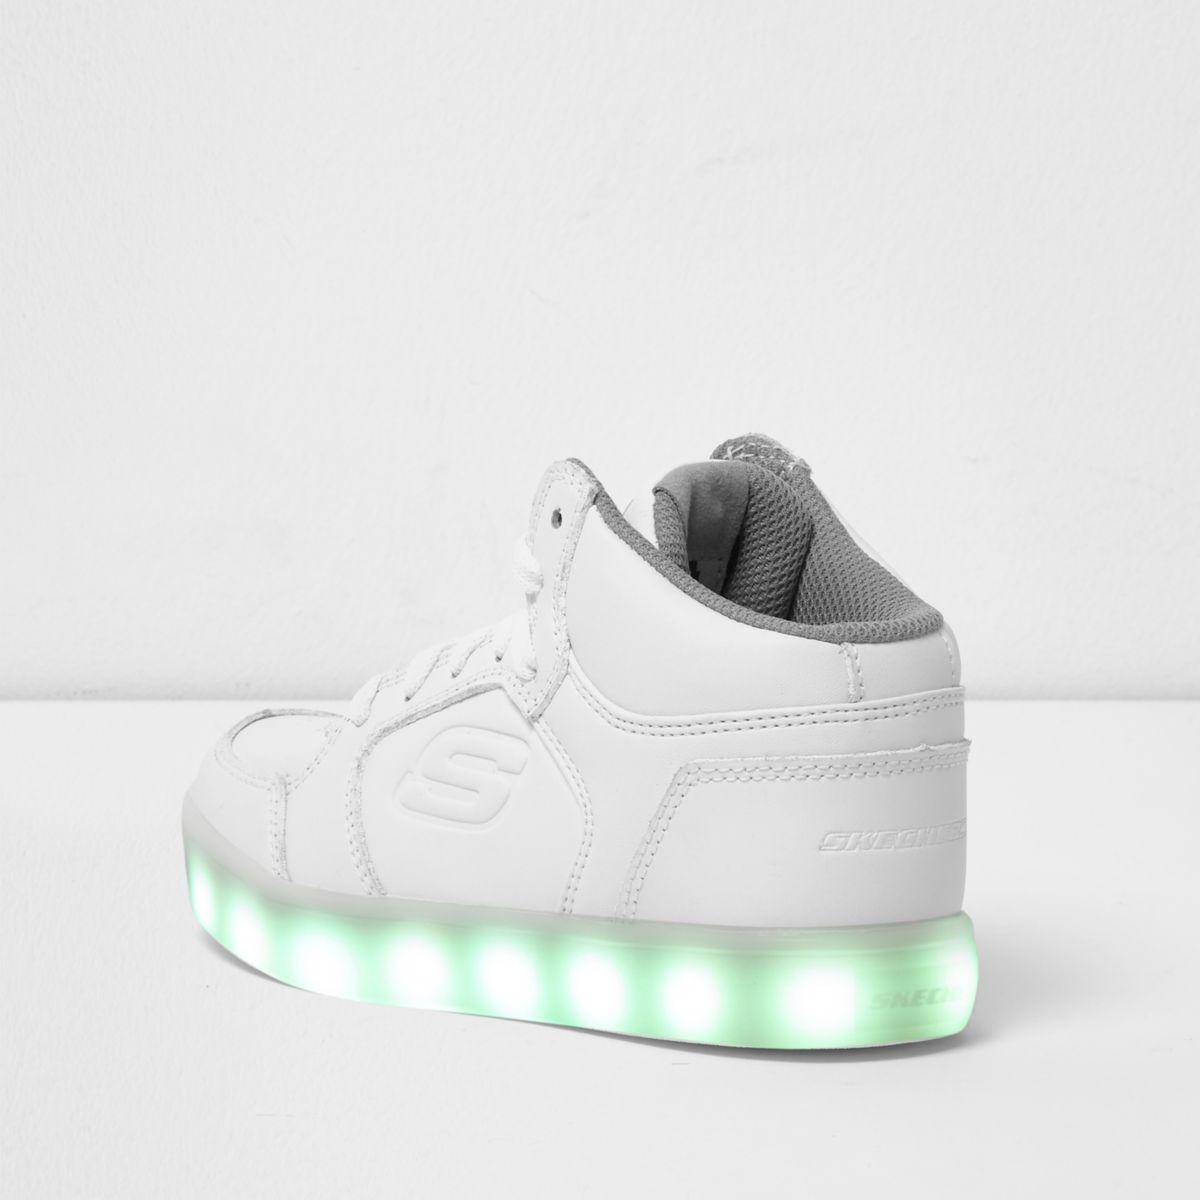 river island light up shoes